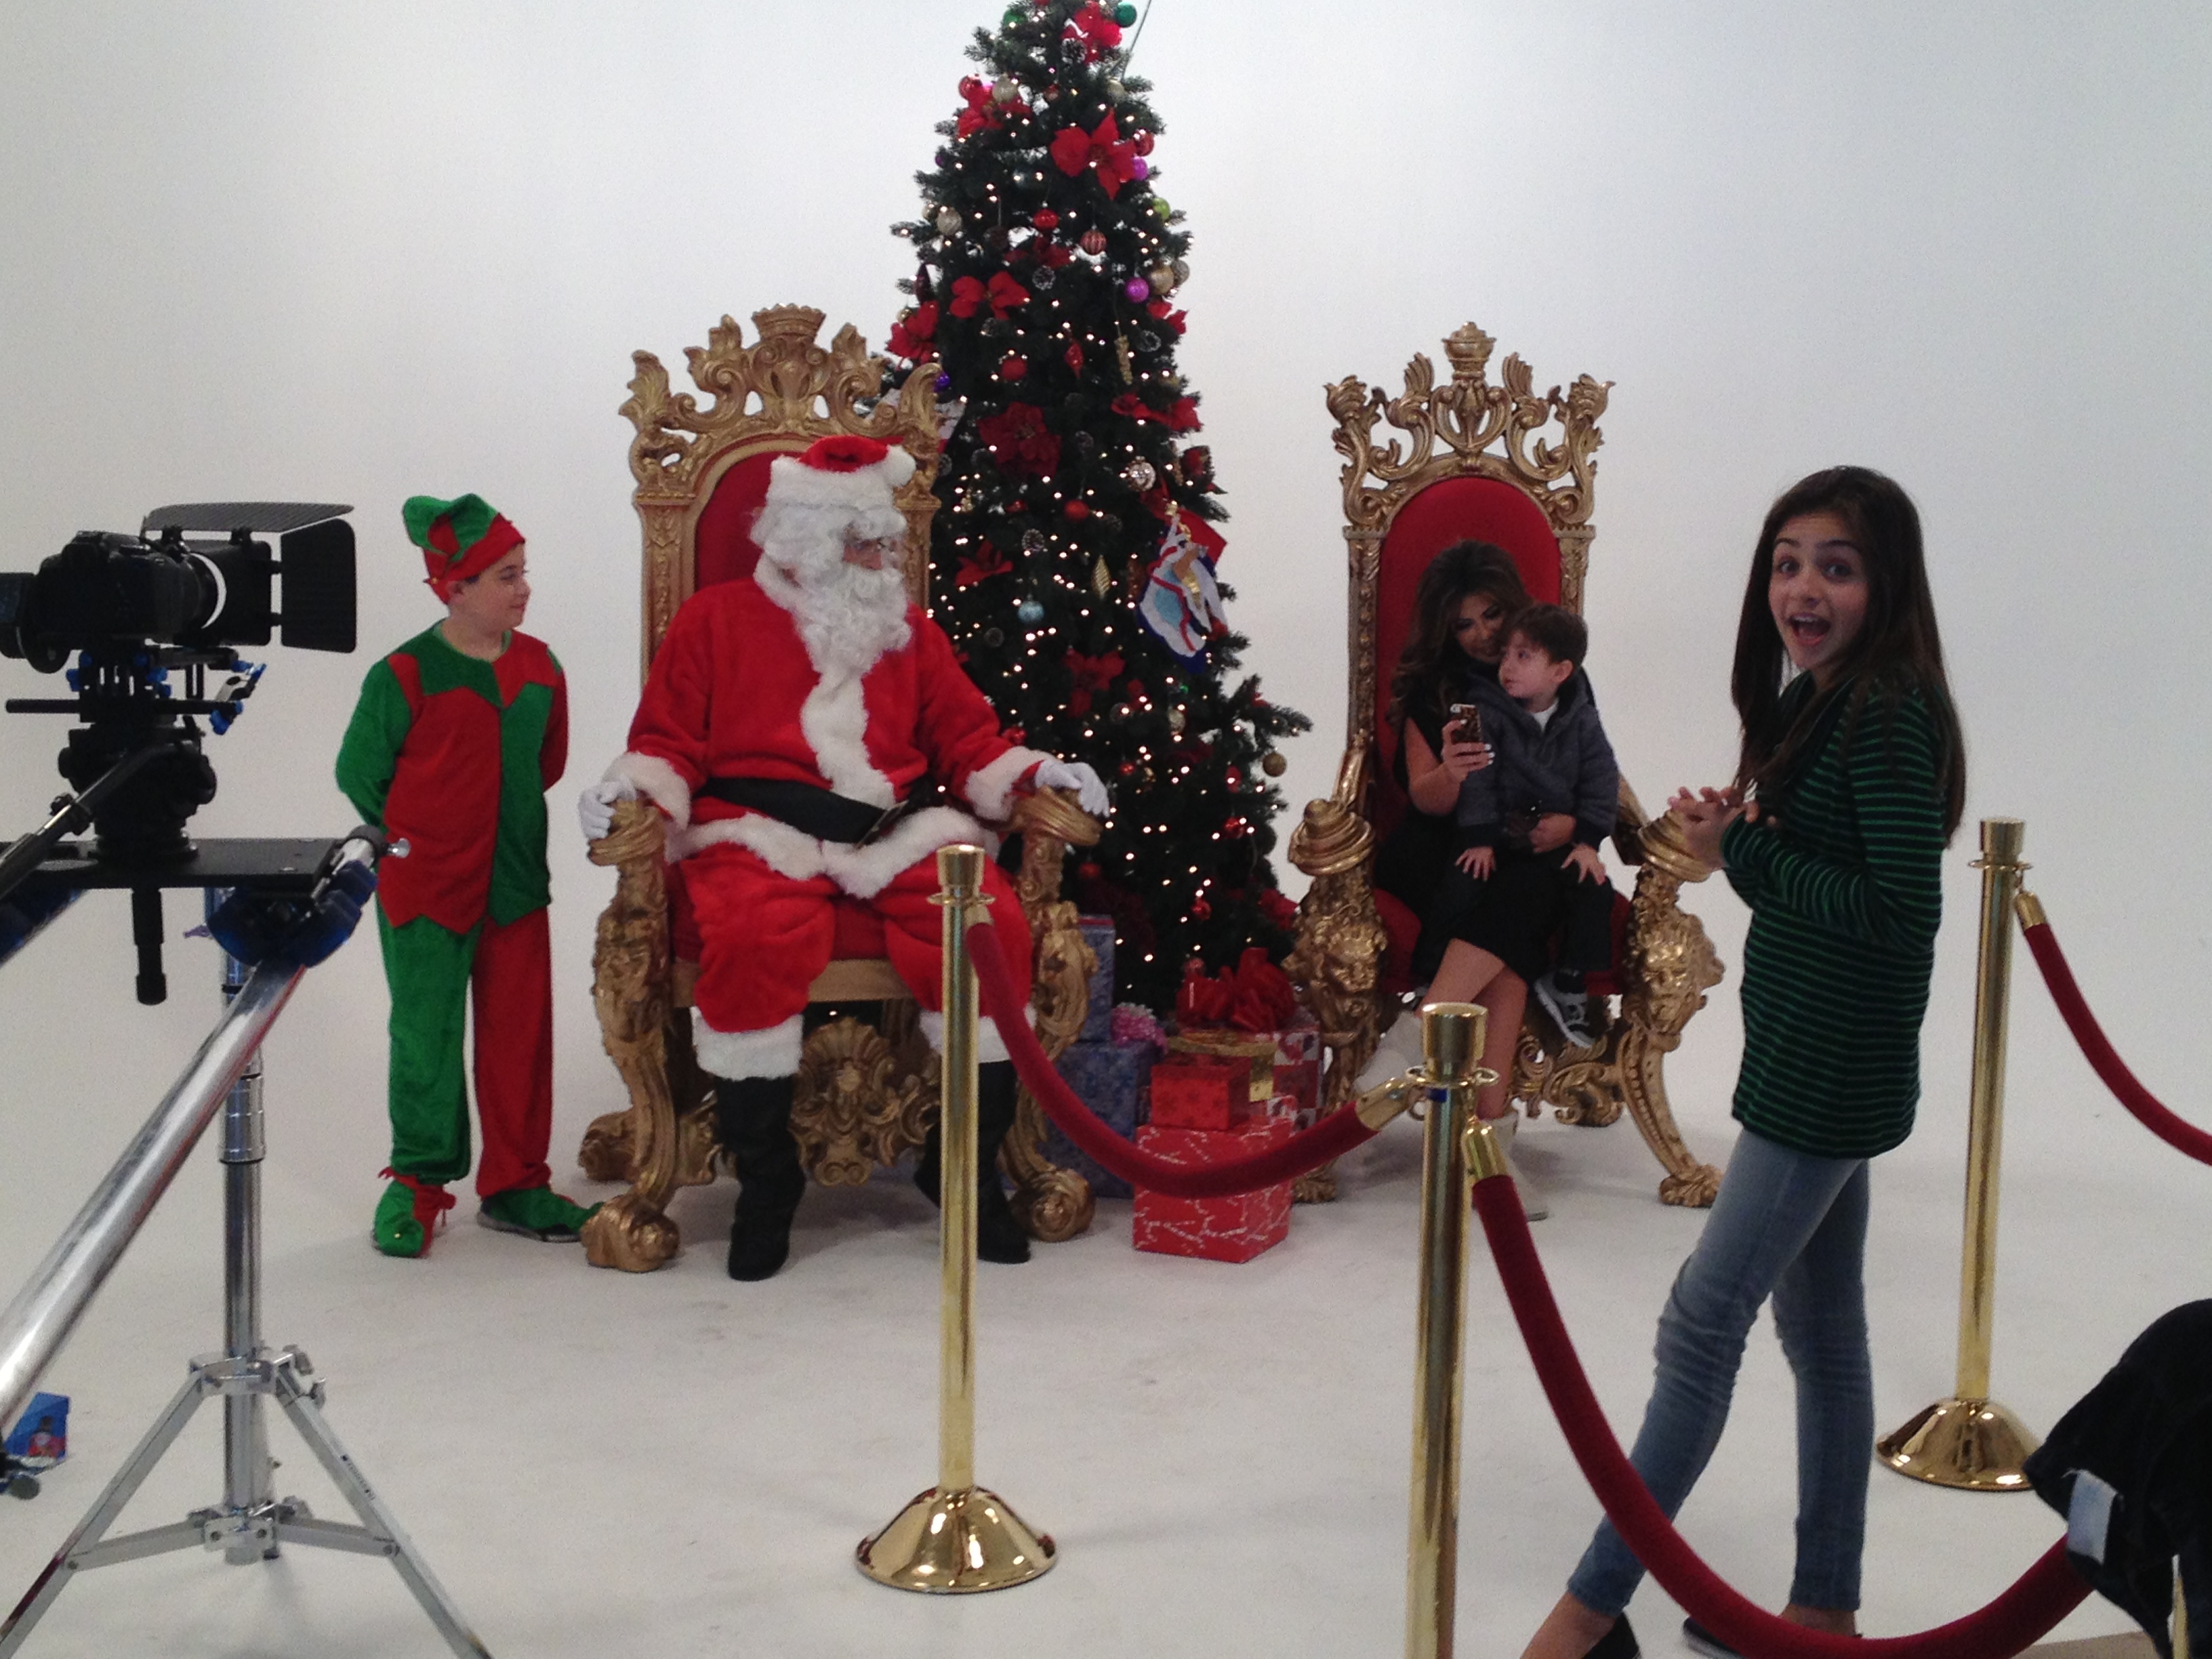 Filming Adrianna's Insurance Christmas Commerical in Spanish. Christian is the elf. His sister, Samantha Elizondo, is the lead girl.